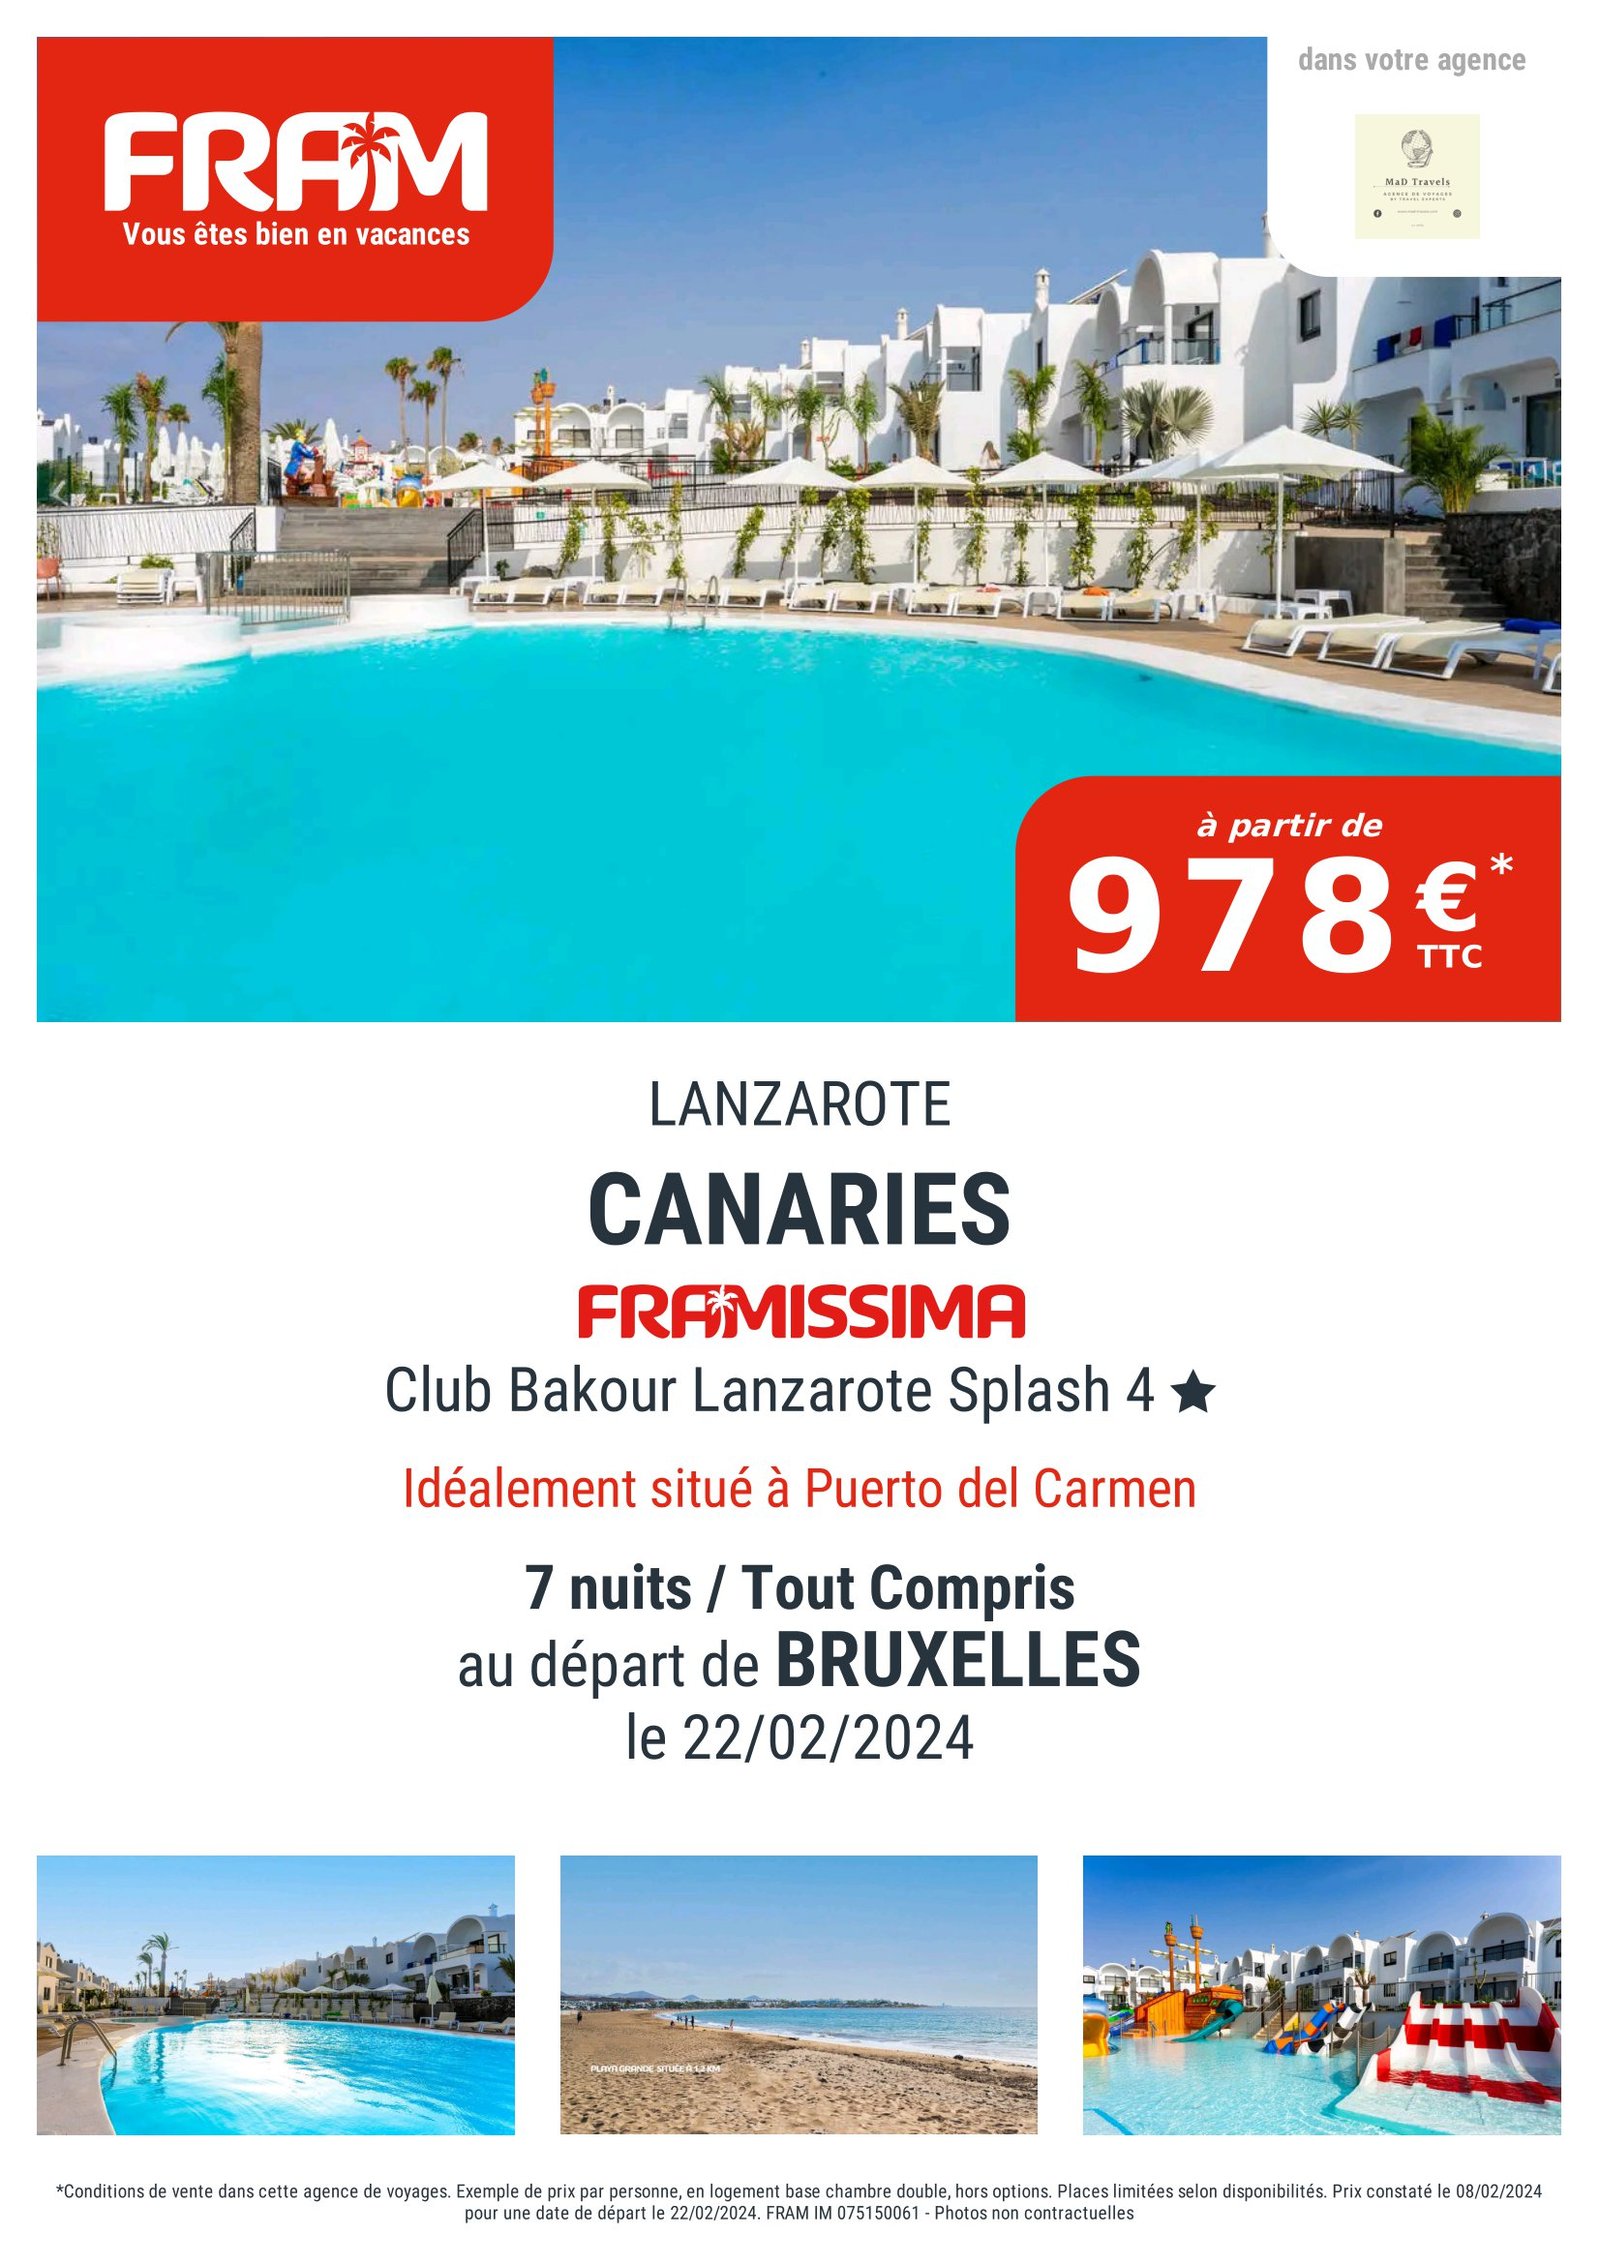 Promotions Mad Travels FEV 24 - Canaries